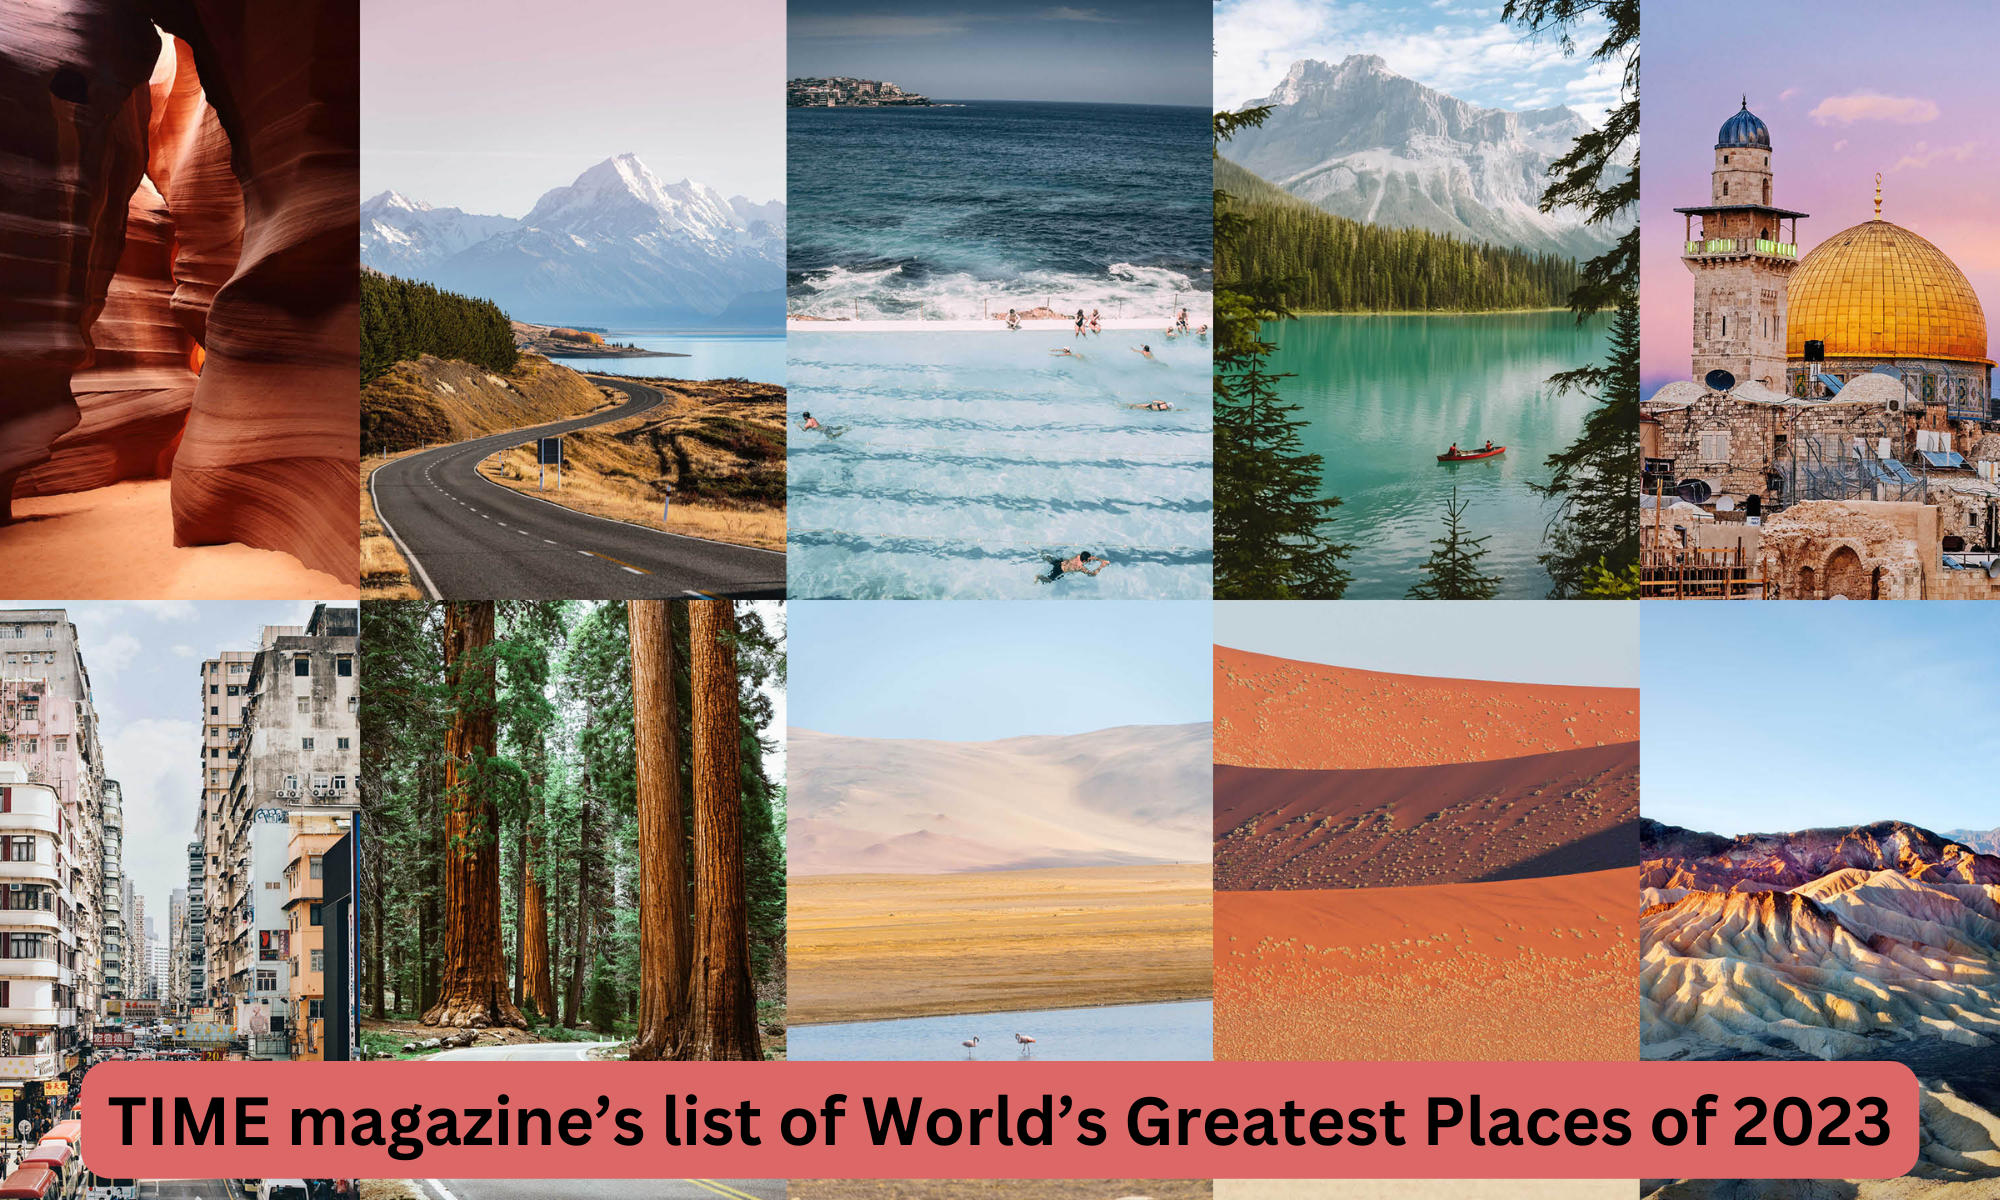 TIME magazine’s list of World’s Greatest Places of 2023